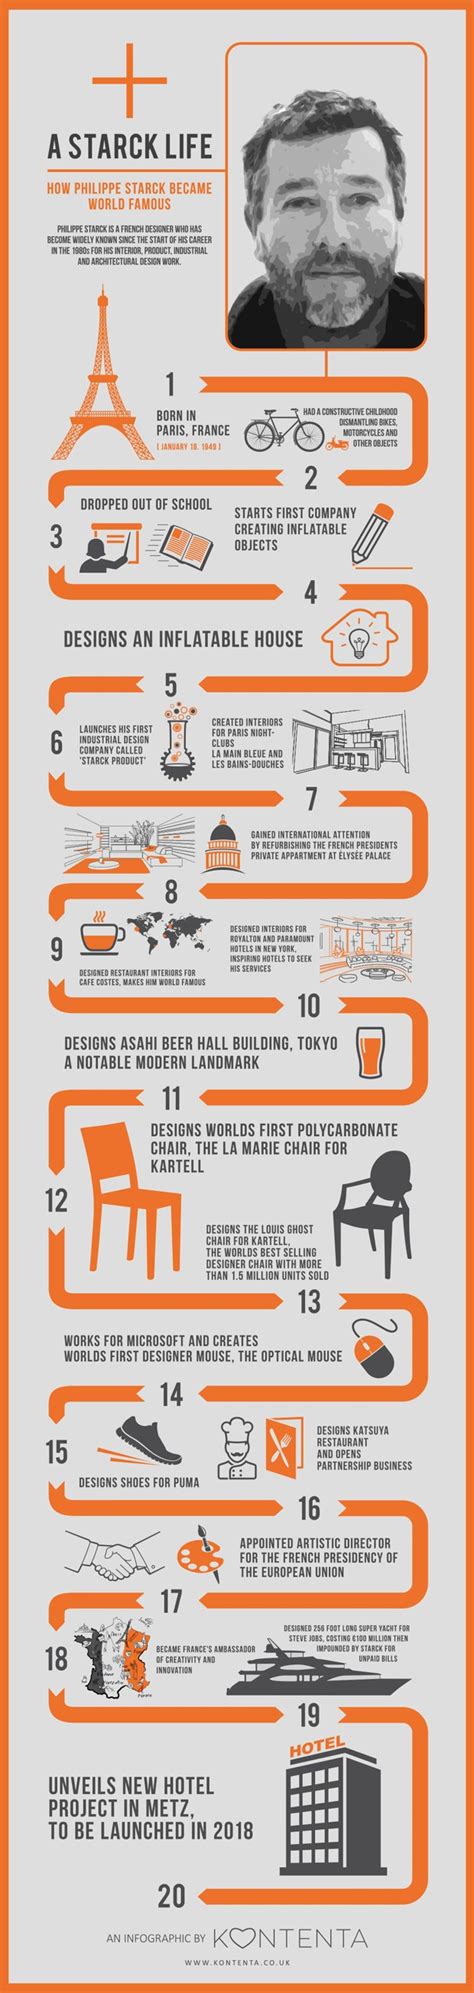 How French Designer Philippe Starck Became World Famous Infographic